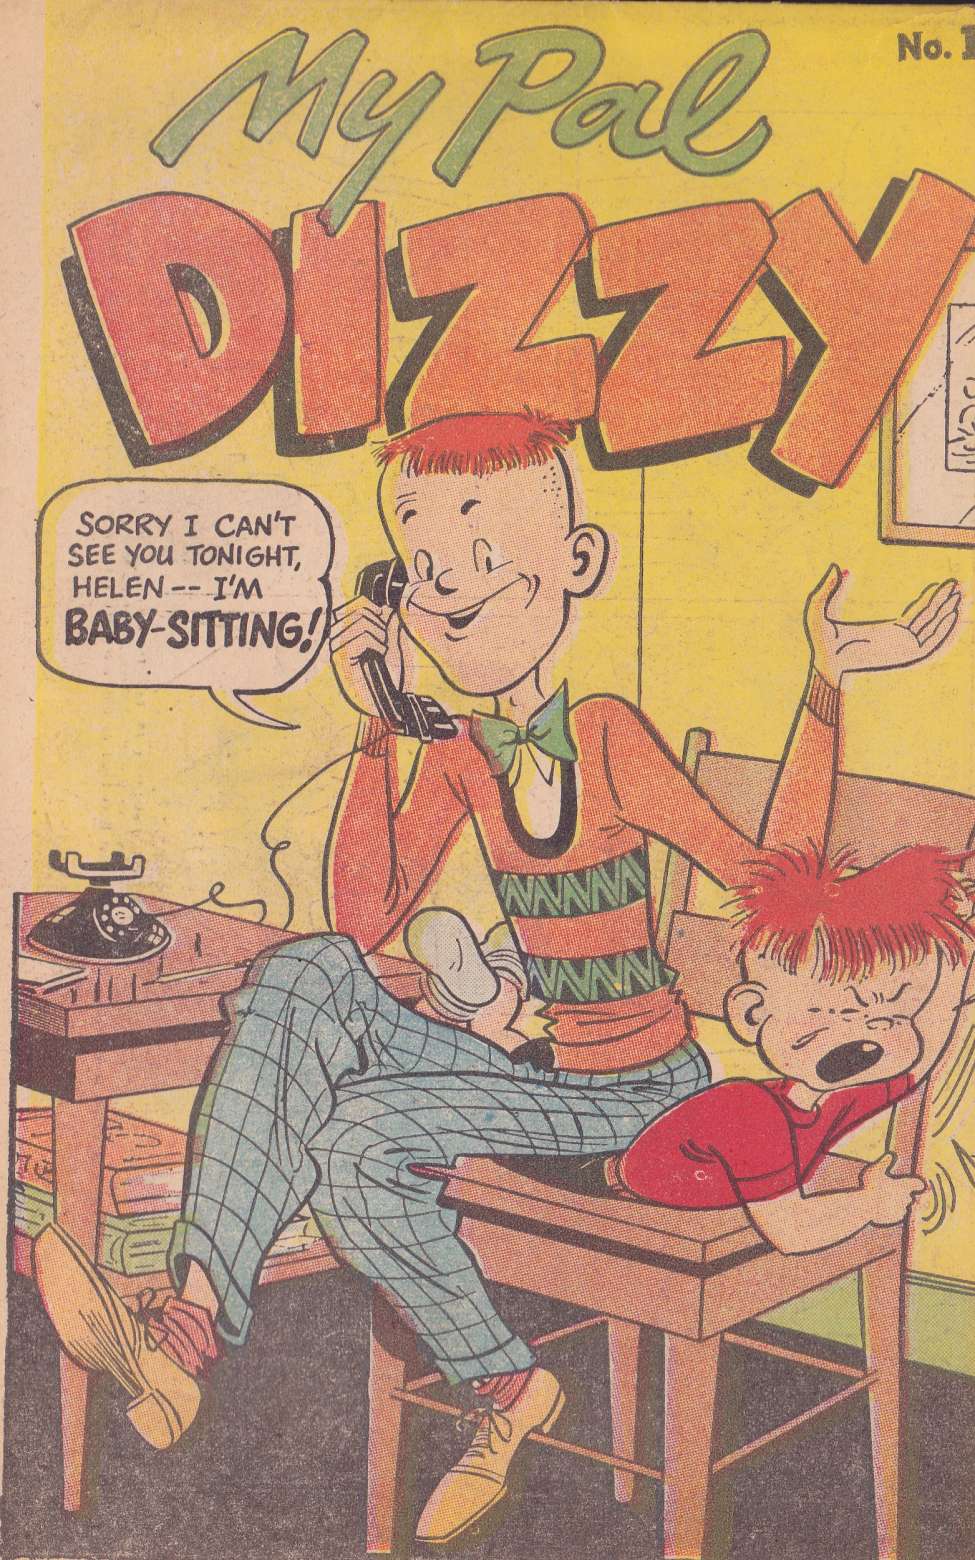 Comic Book Cover For My Pal Dizzy